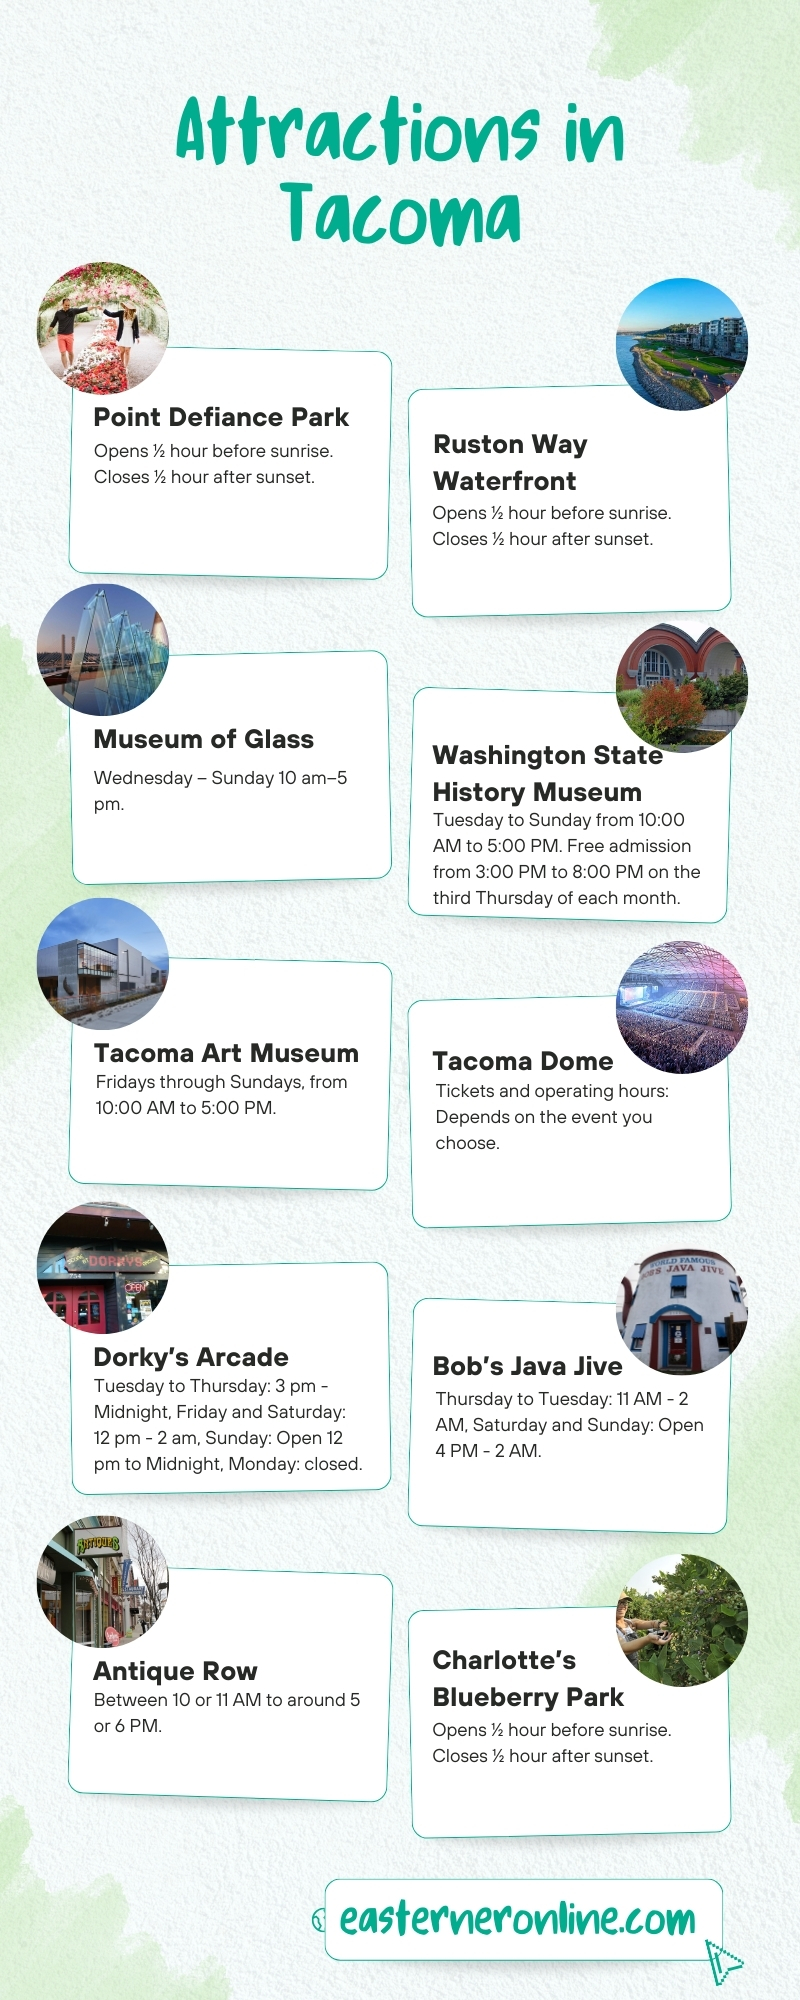 Attractions in Tacoma